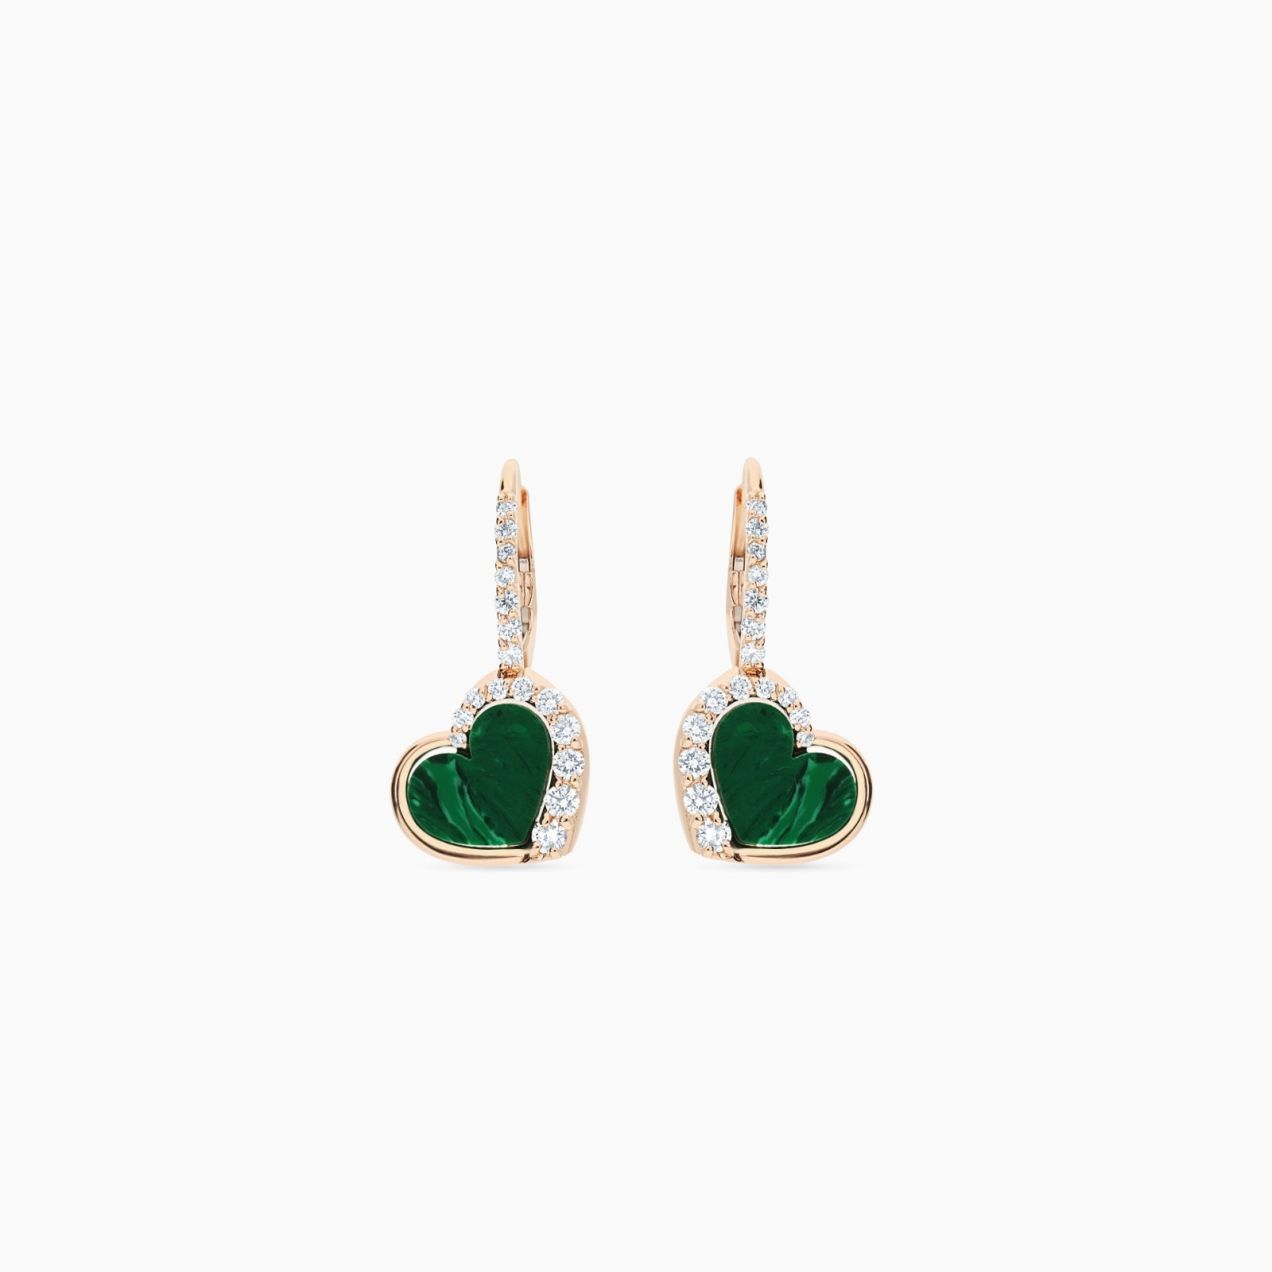 Heart-shaped earrings in rose gold with malachite and diamonds